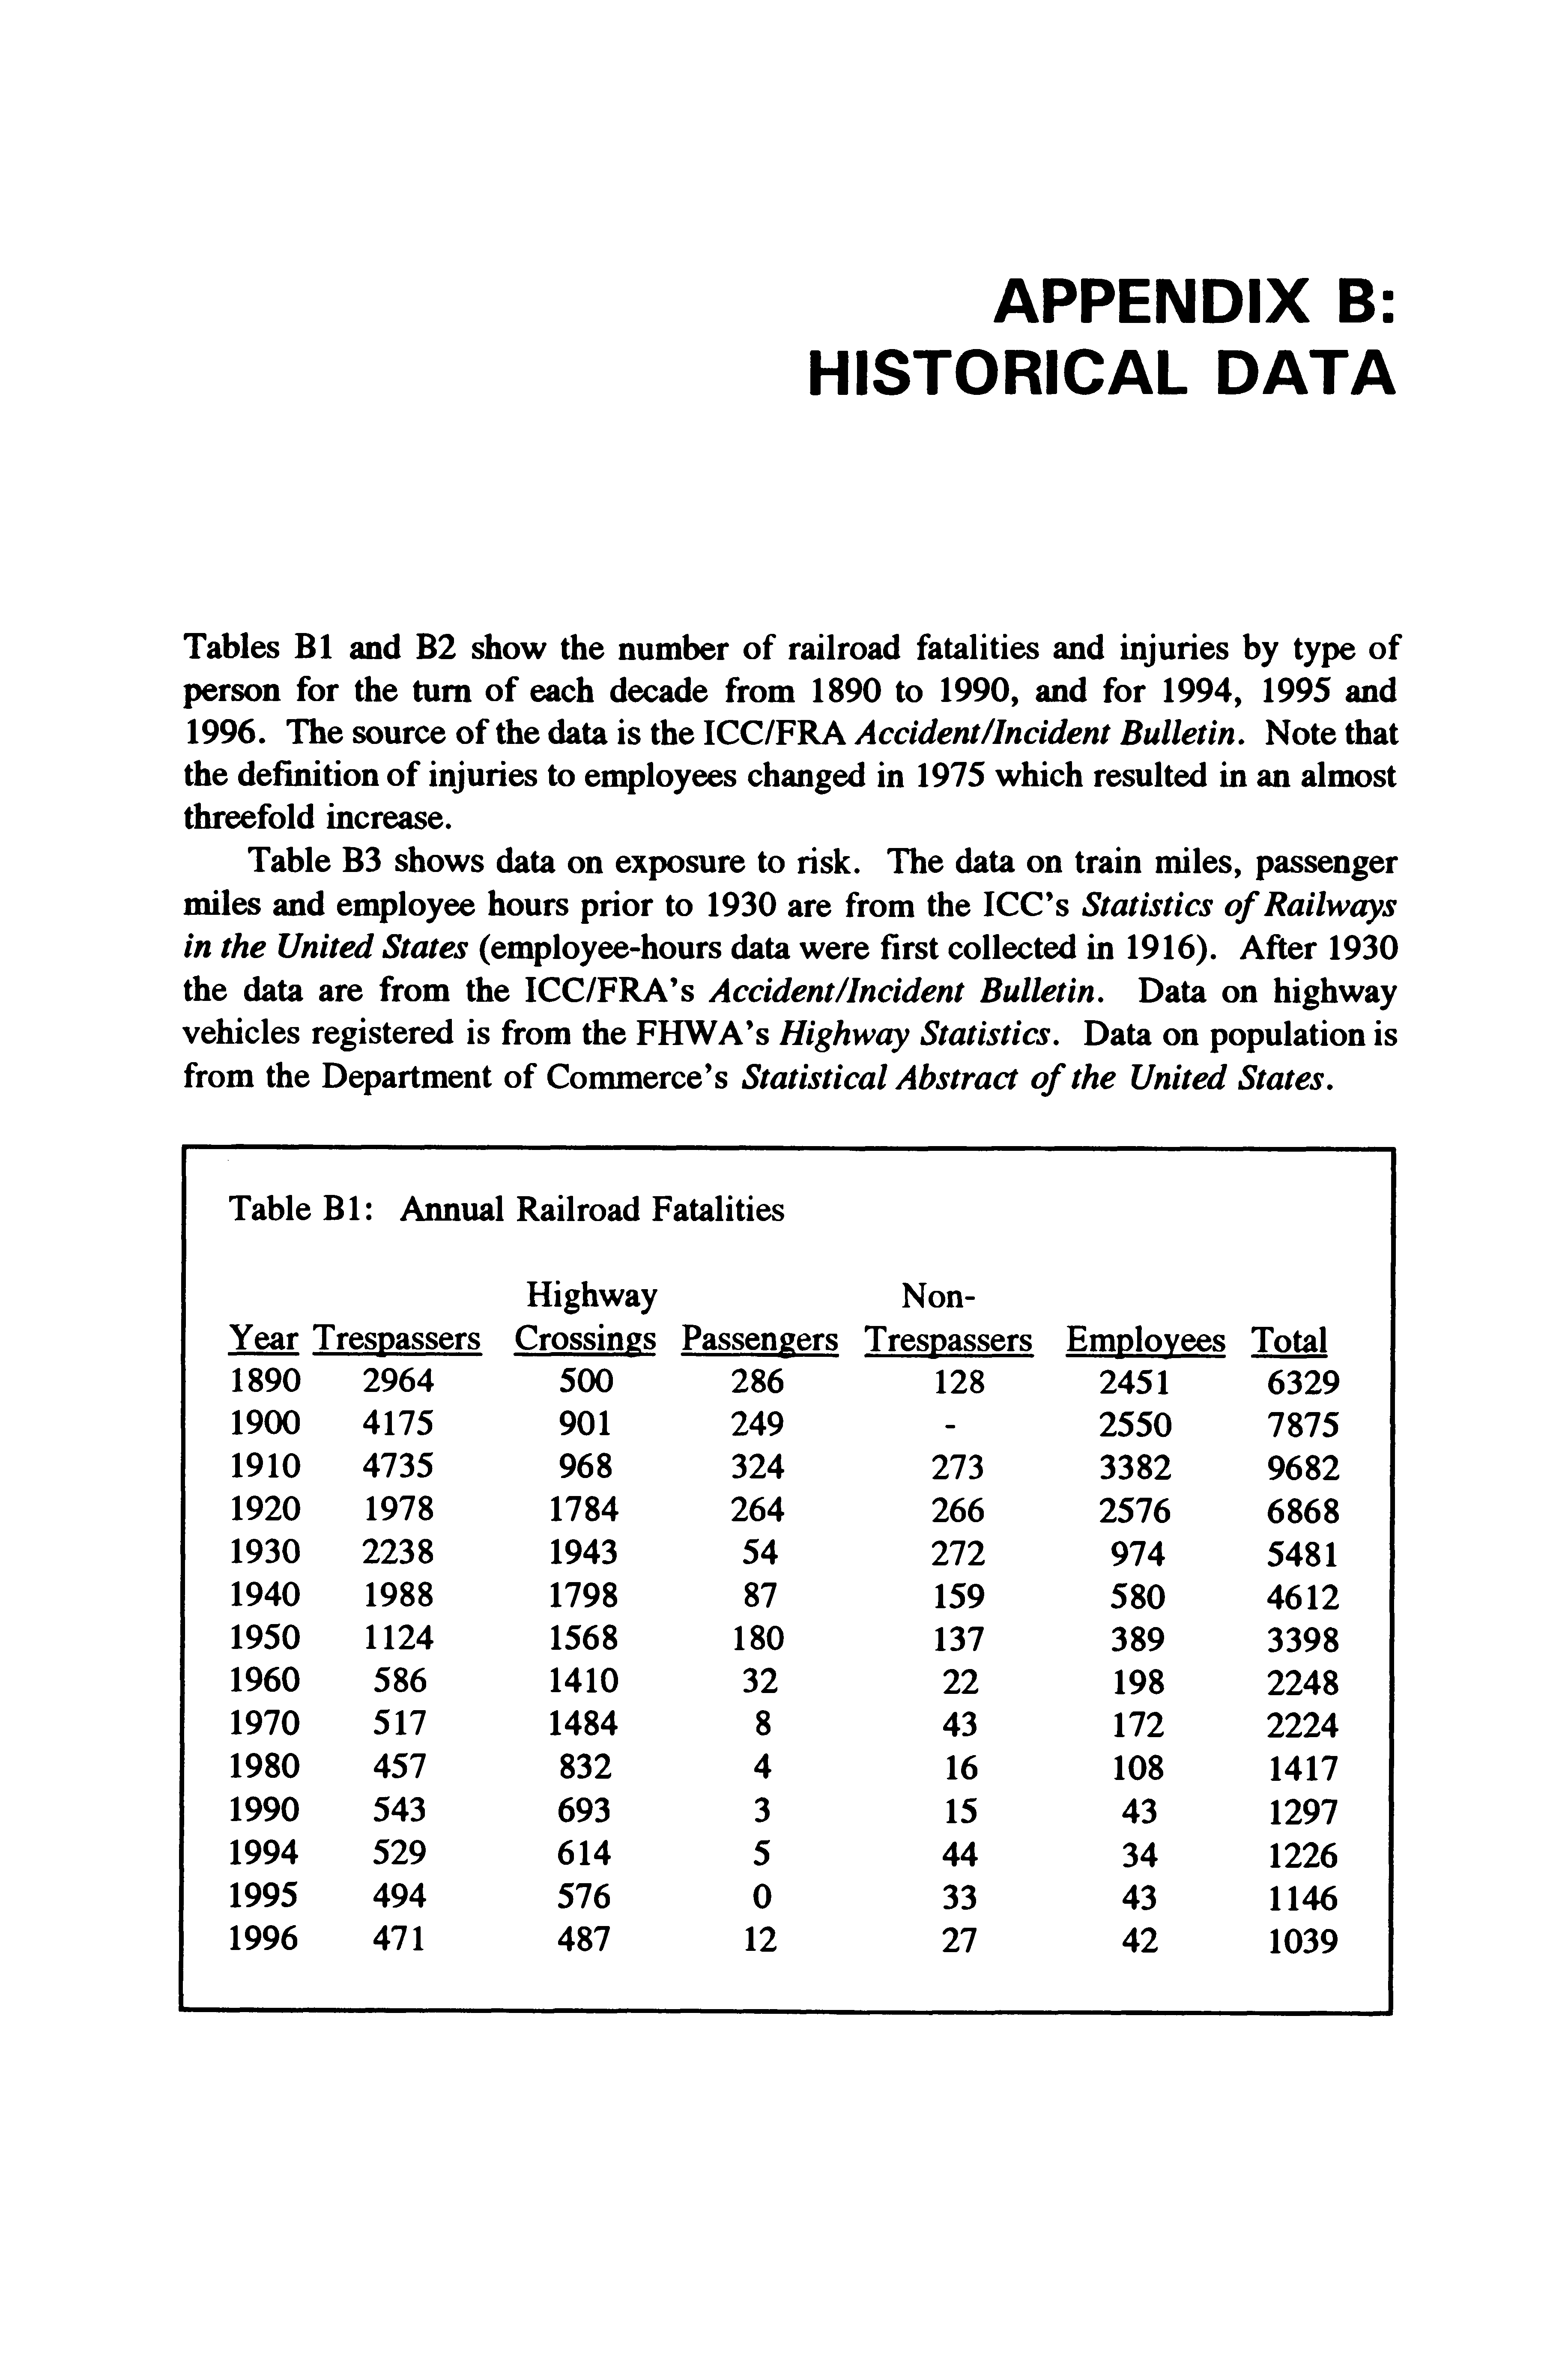 Tables B1 and B2 show the number of railroad fatalities and injuries by type of person for the turn of each decade from 1890 to 1990, and for 1994, 1995 and 1996. The source of the data is the ICC/FRA Accident/Incident Bulletin. Note that the definition of injuries to employees changed in 1975 which resulted in an almost threefold increase.